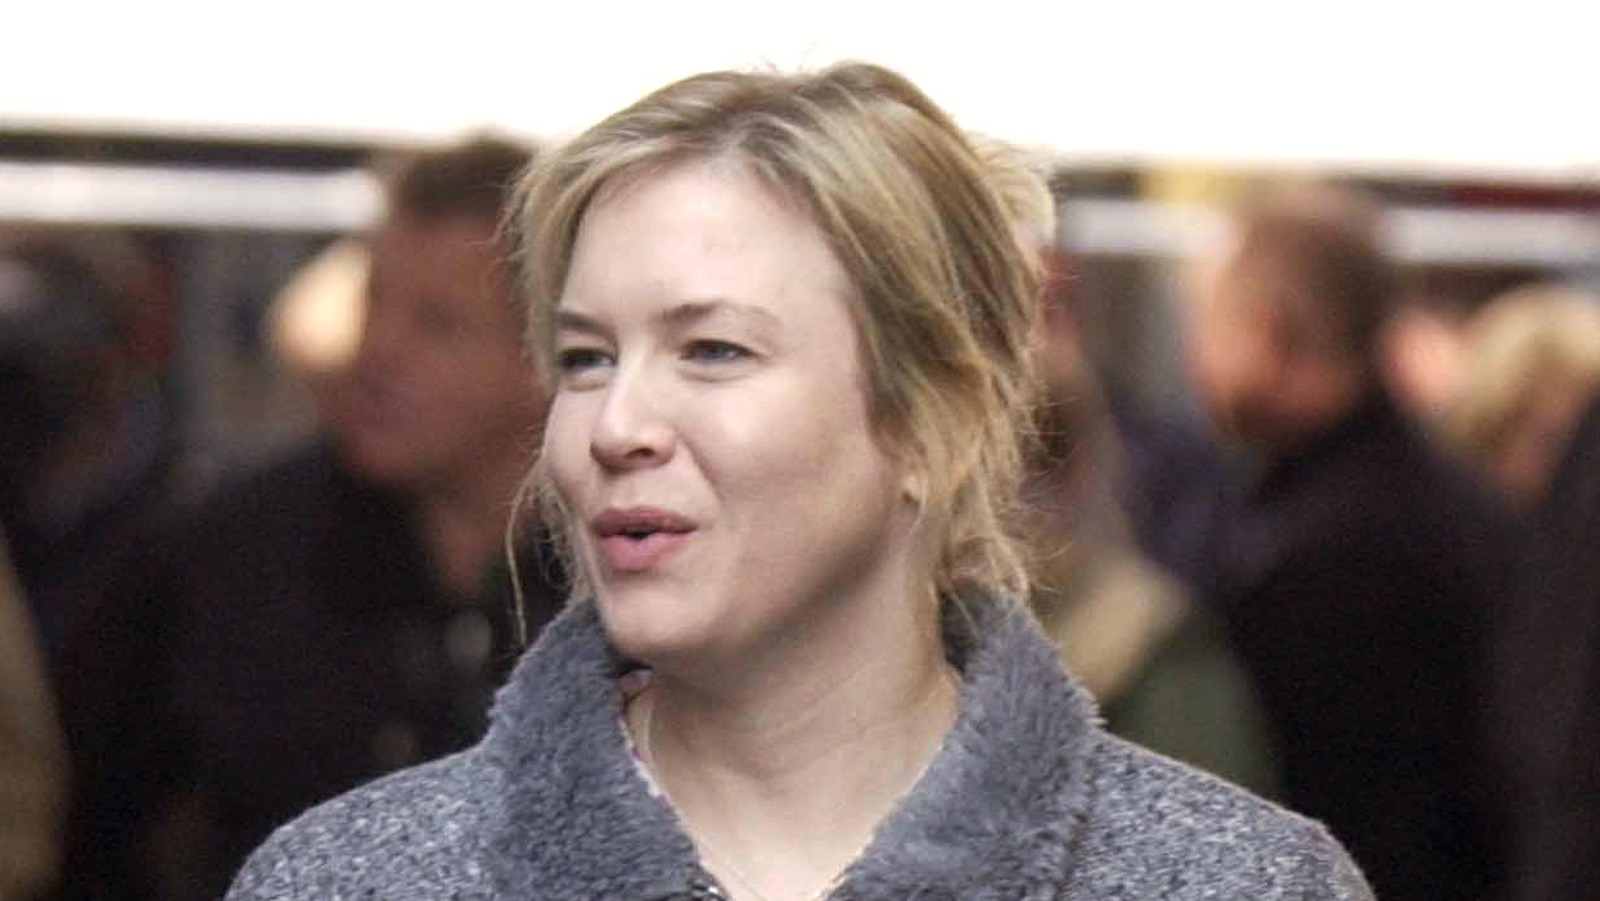 Things You Never Noticed About Bridget Jones Diary Until Now